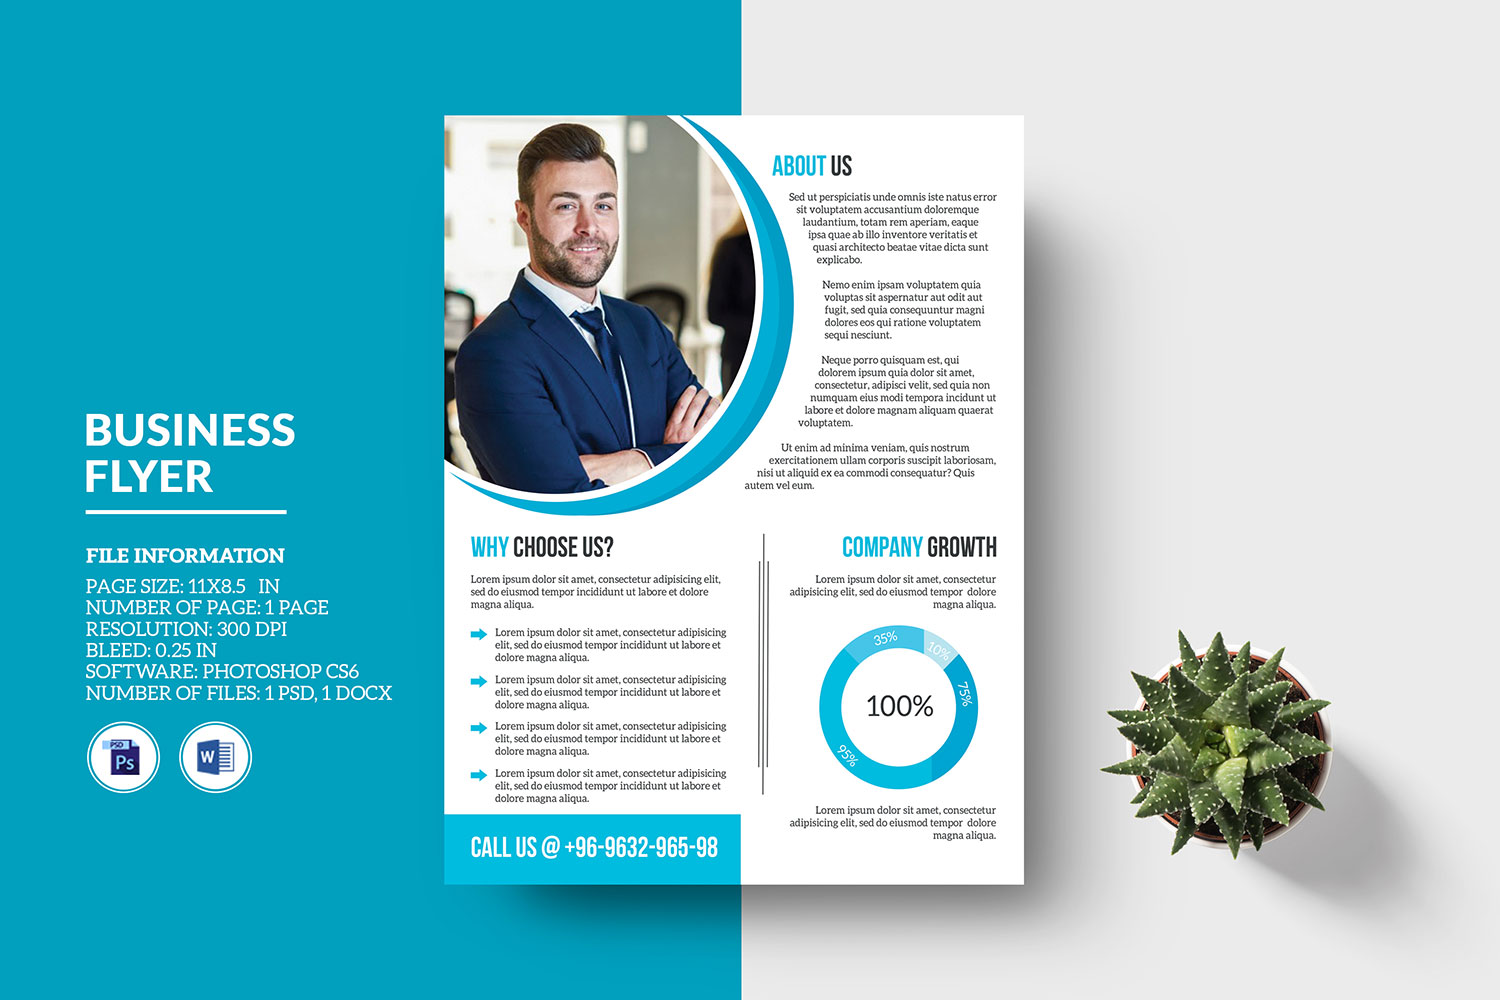 Minimal Company Business Flyer Template. Ms word and Photoshop.